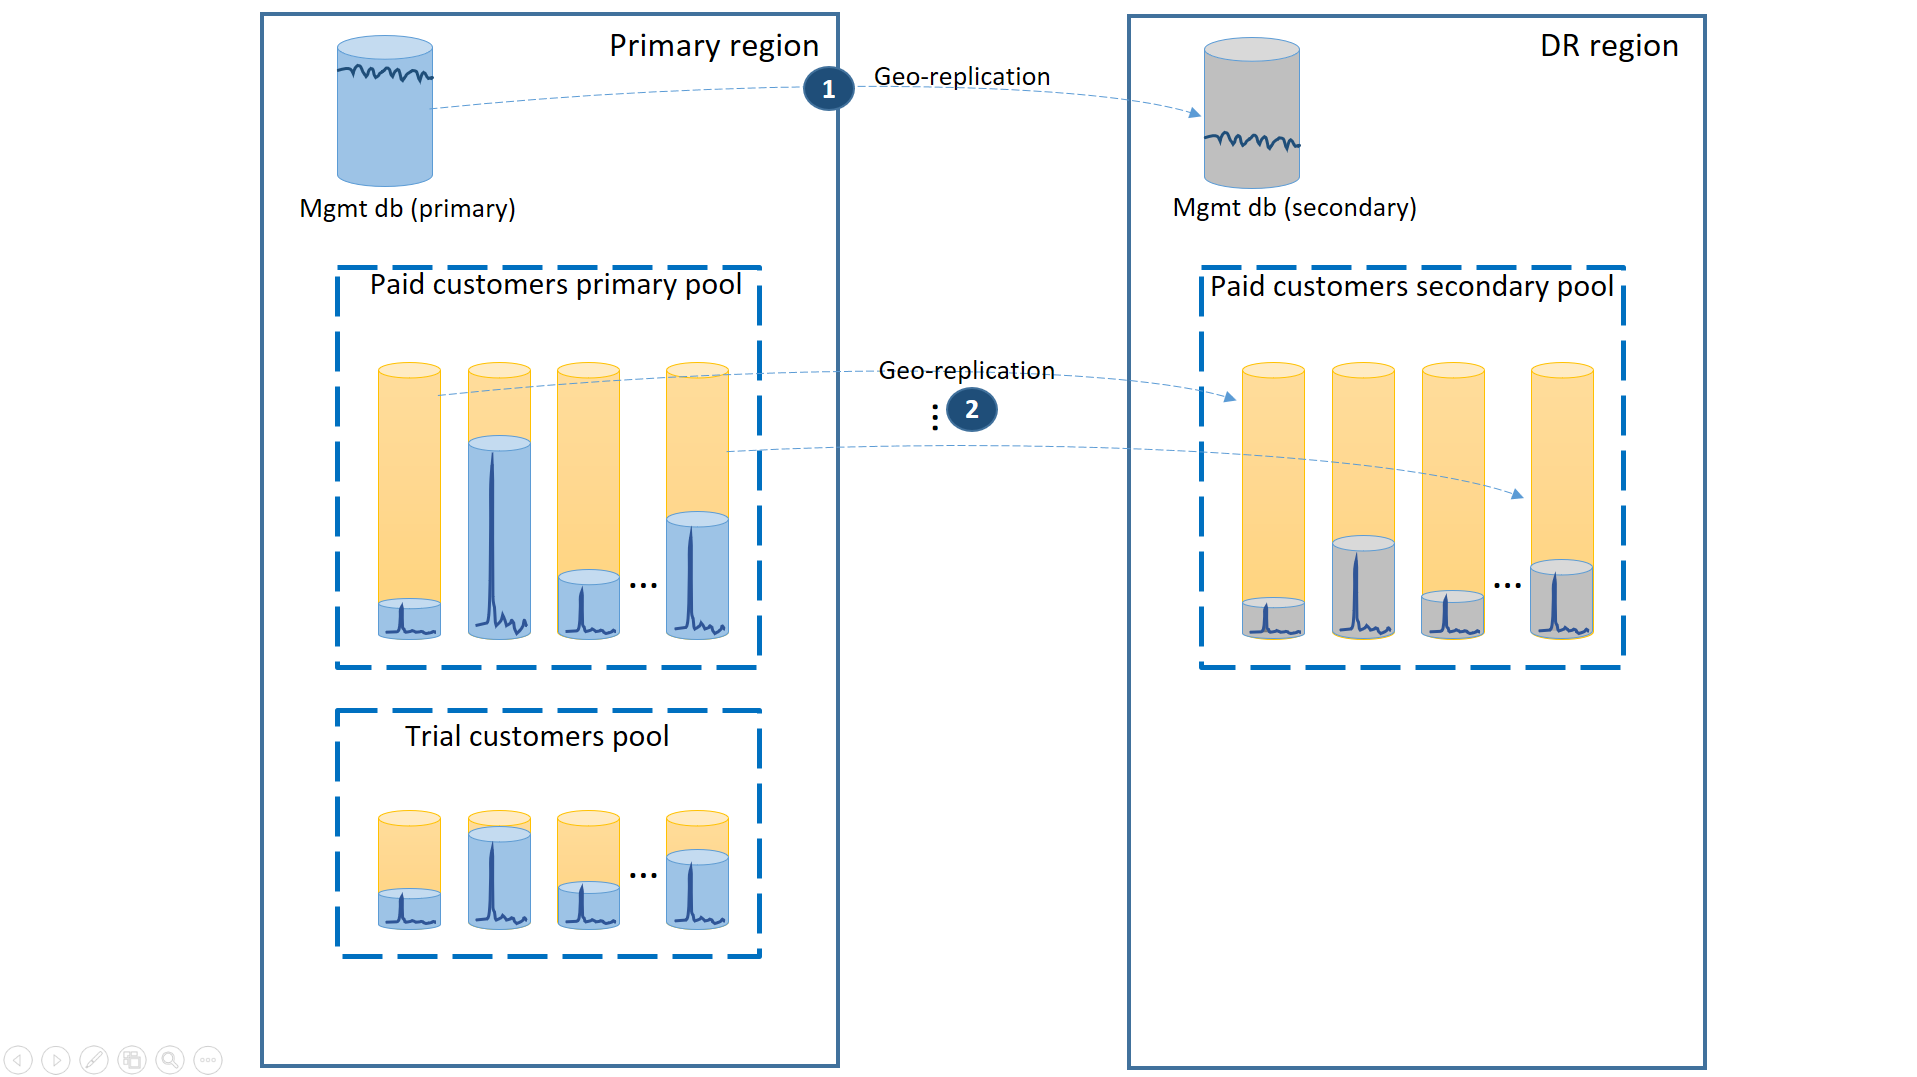 Diagram shows a primary region and a D R region which employ geo-replication between the management database and paid customers primary pool and secondary pool with no replication for the trial customers pool.